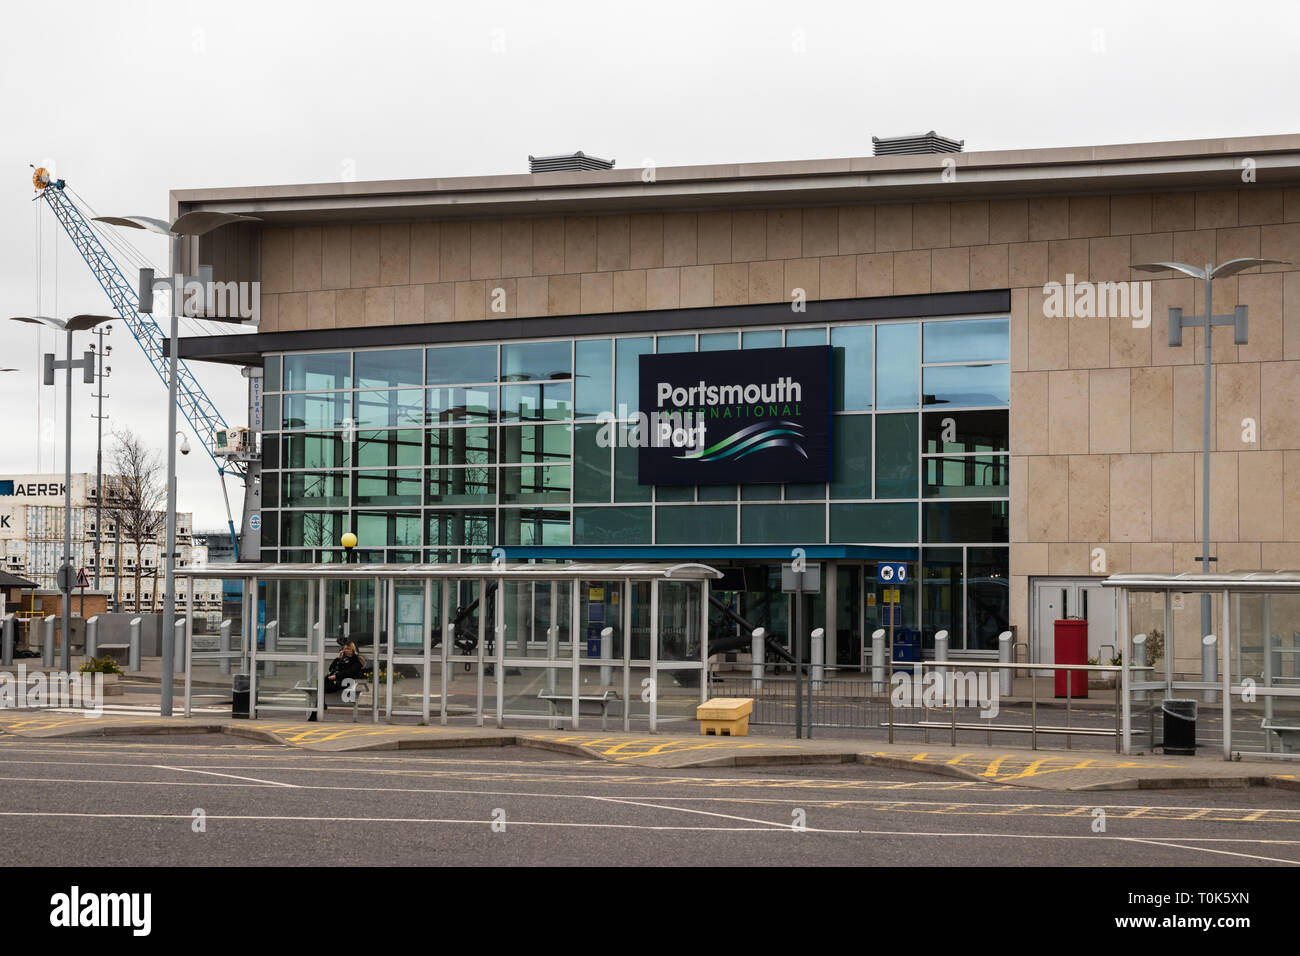 Portsmouth continental ferry port entrance Stock Photo - Alamy